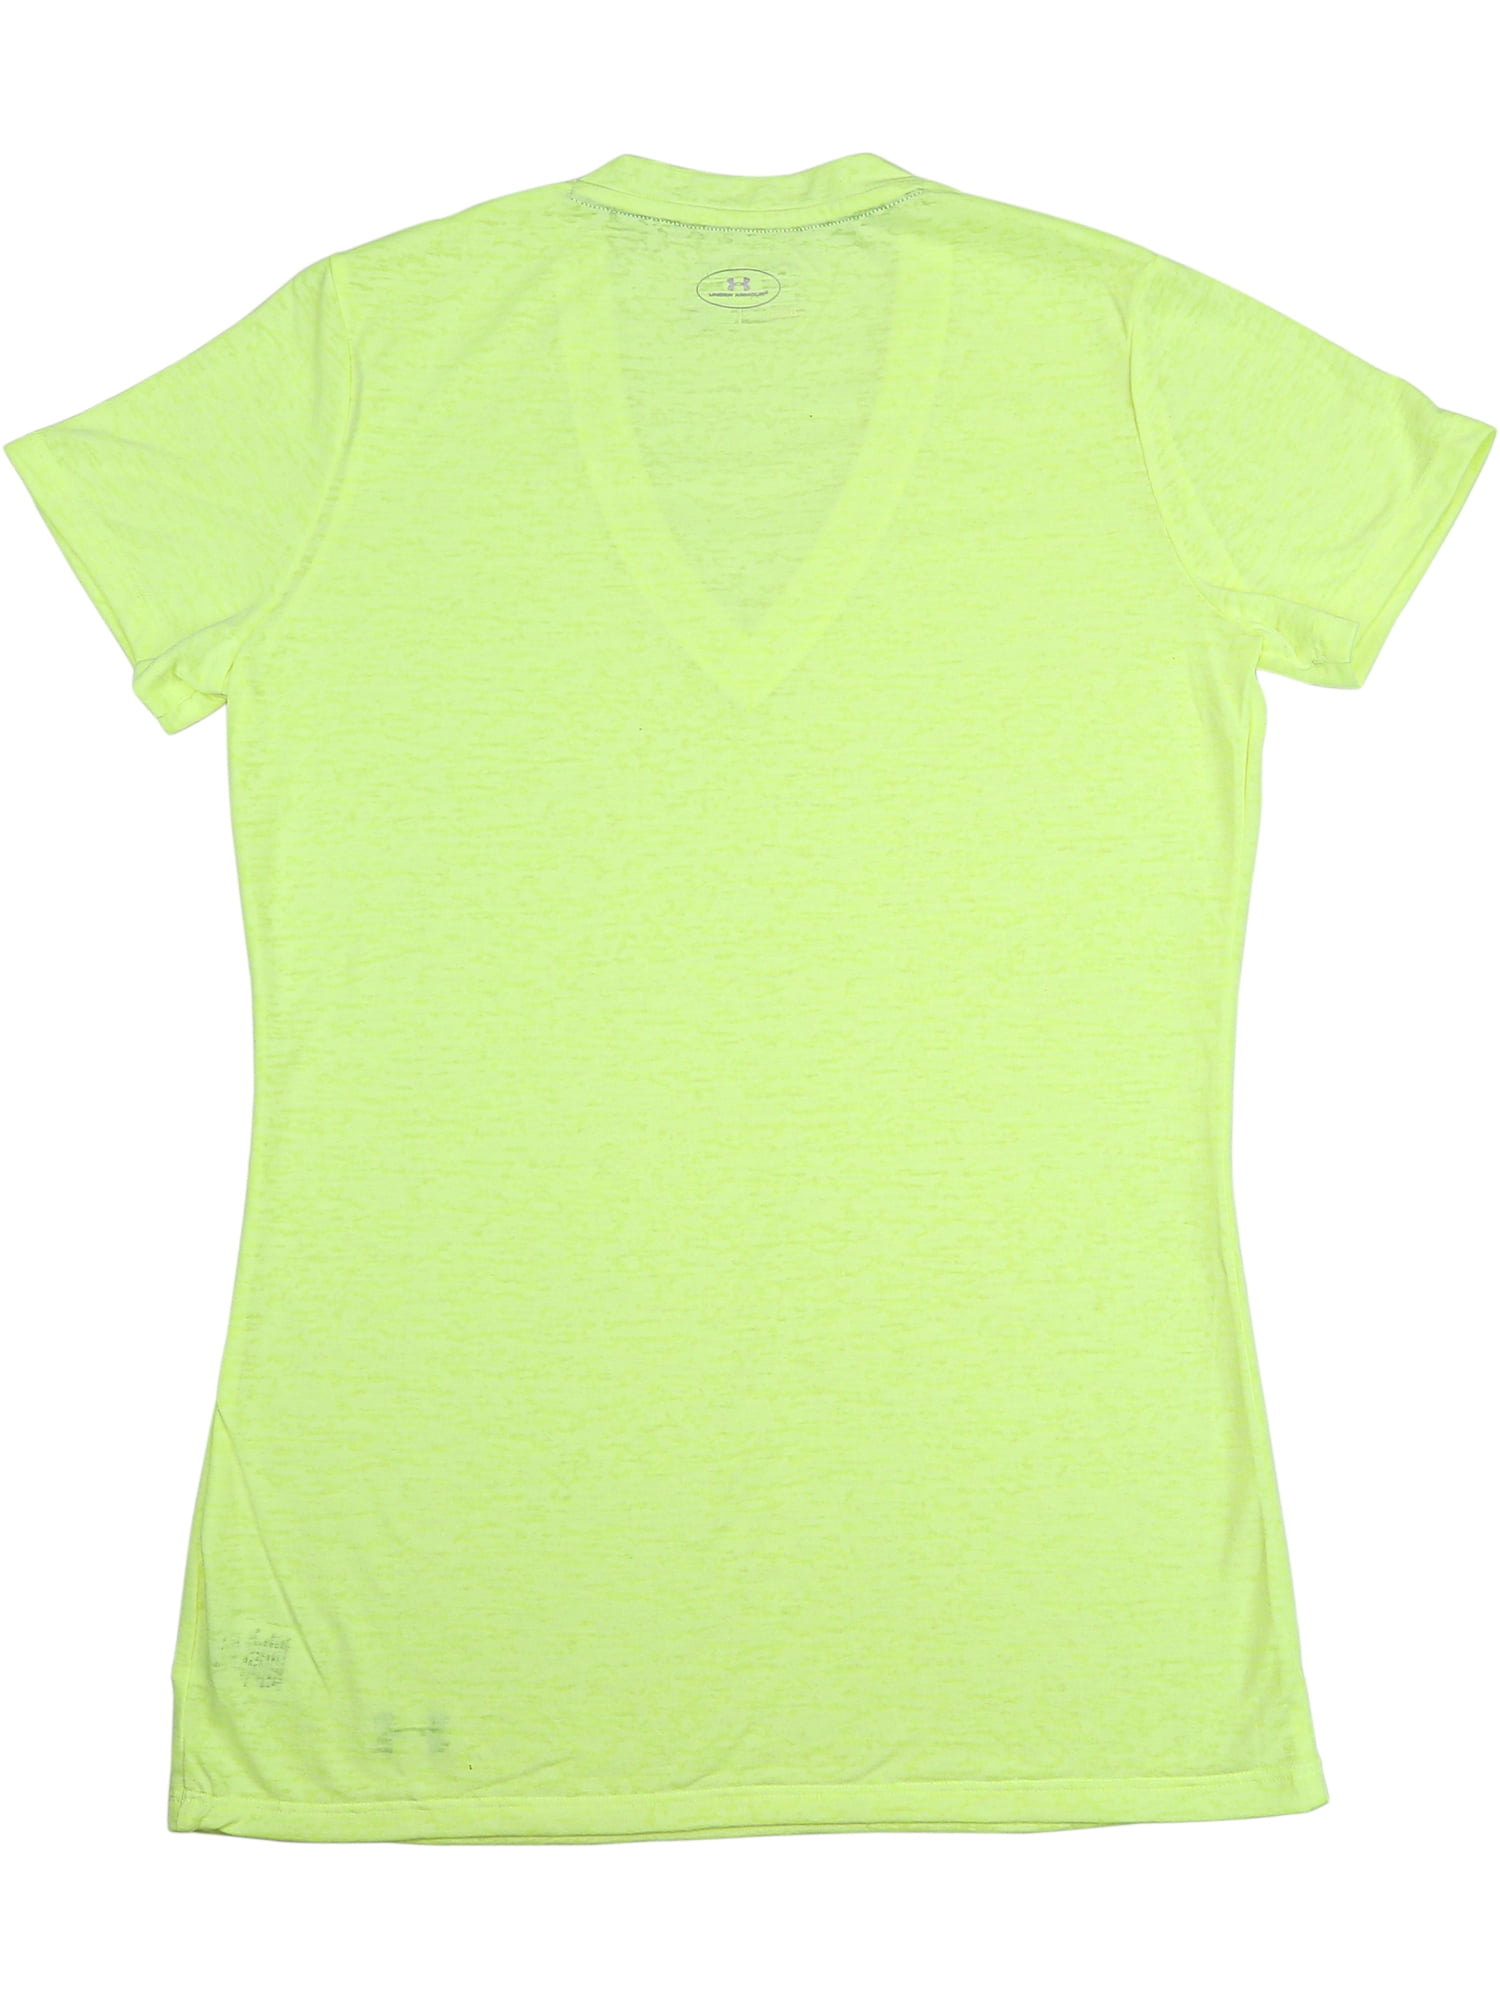 Under Armour Women's High Vis Yellow / Steel V-Neck Loose Fit Tee Short ...